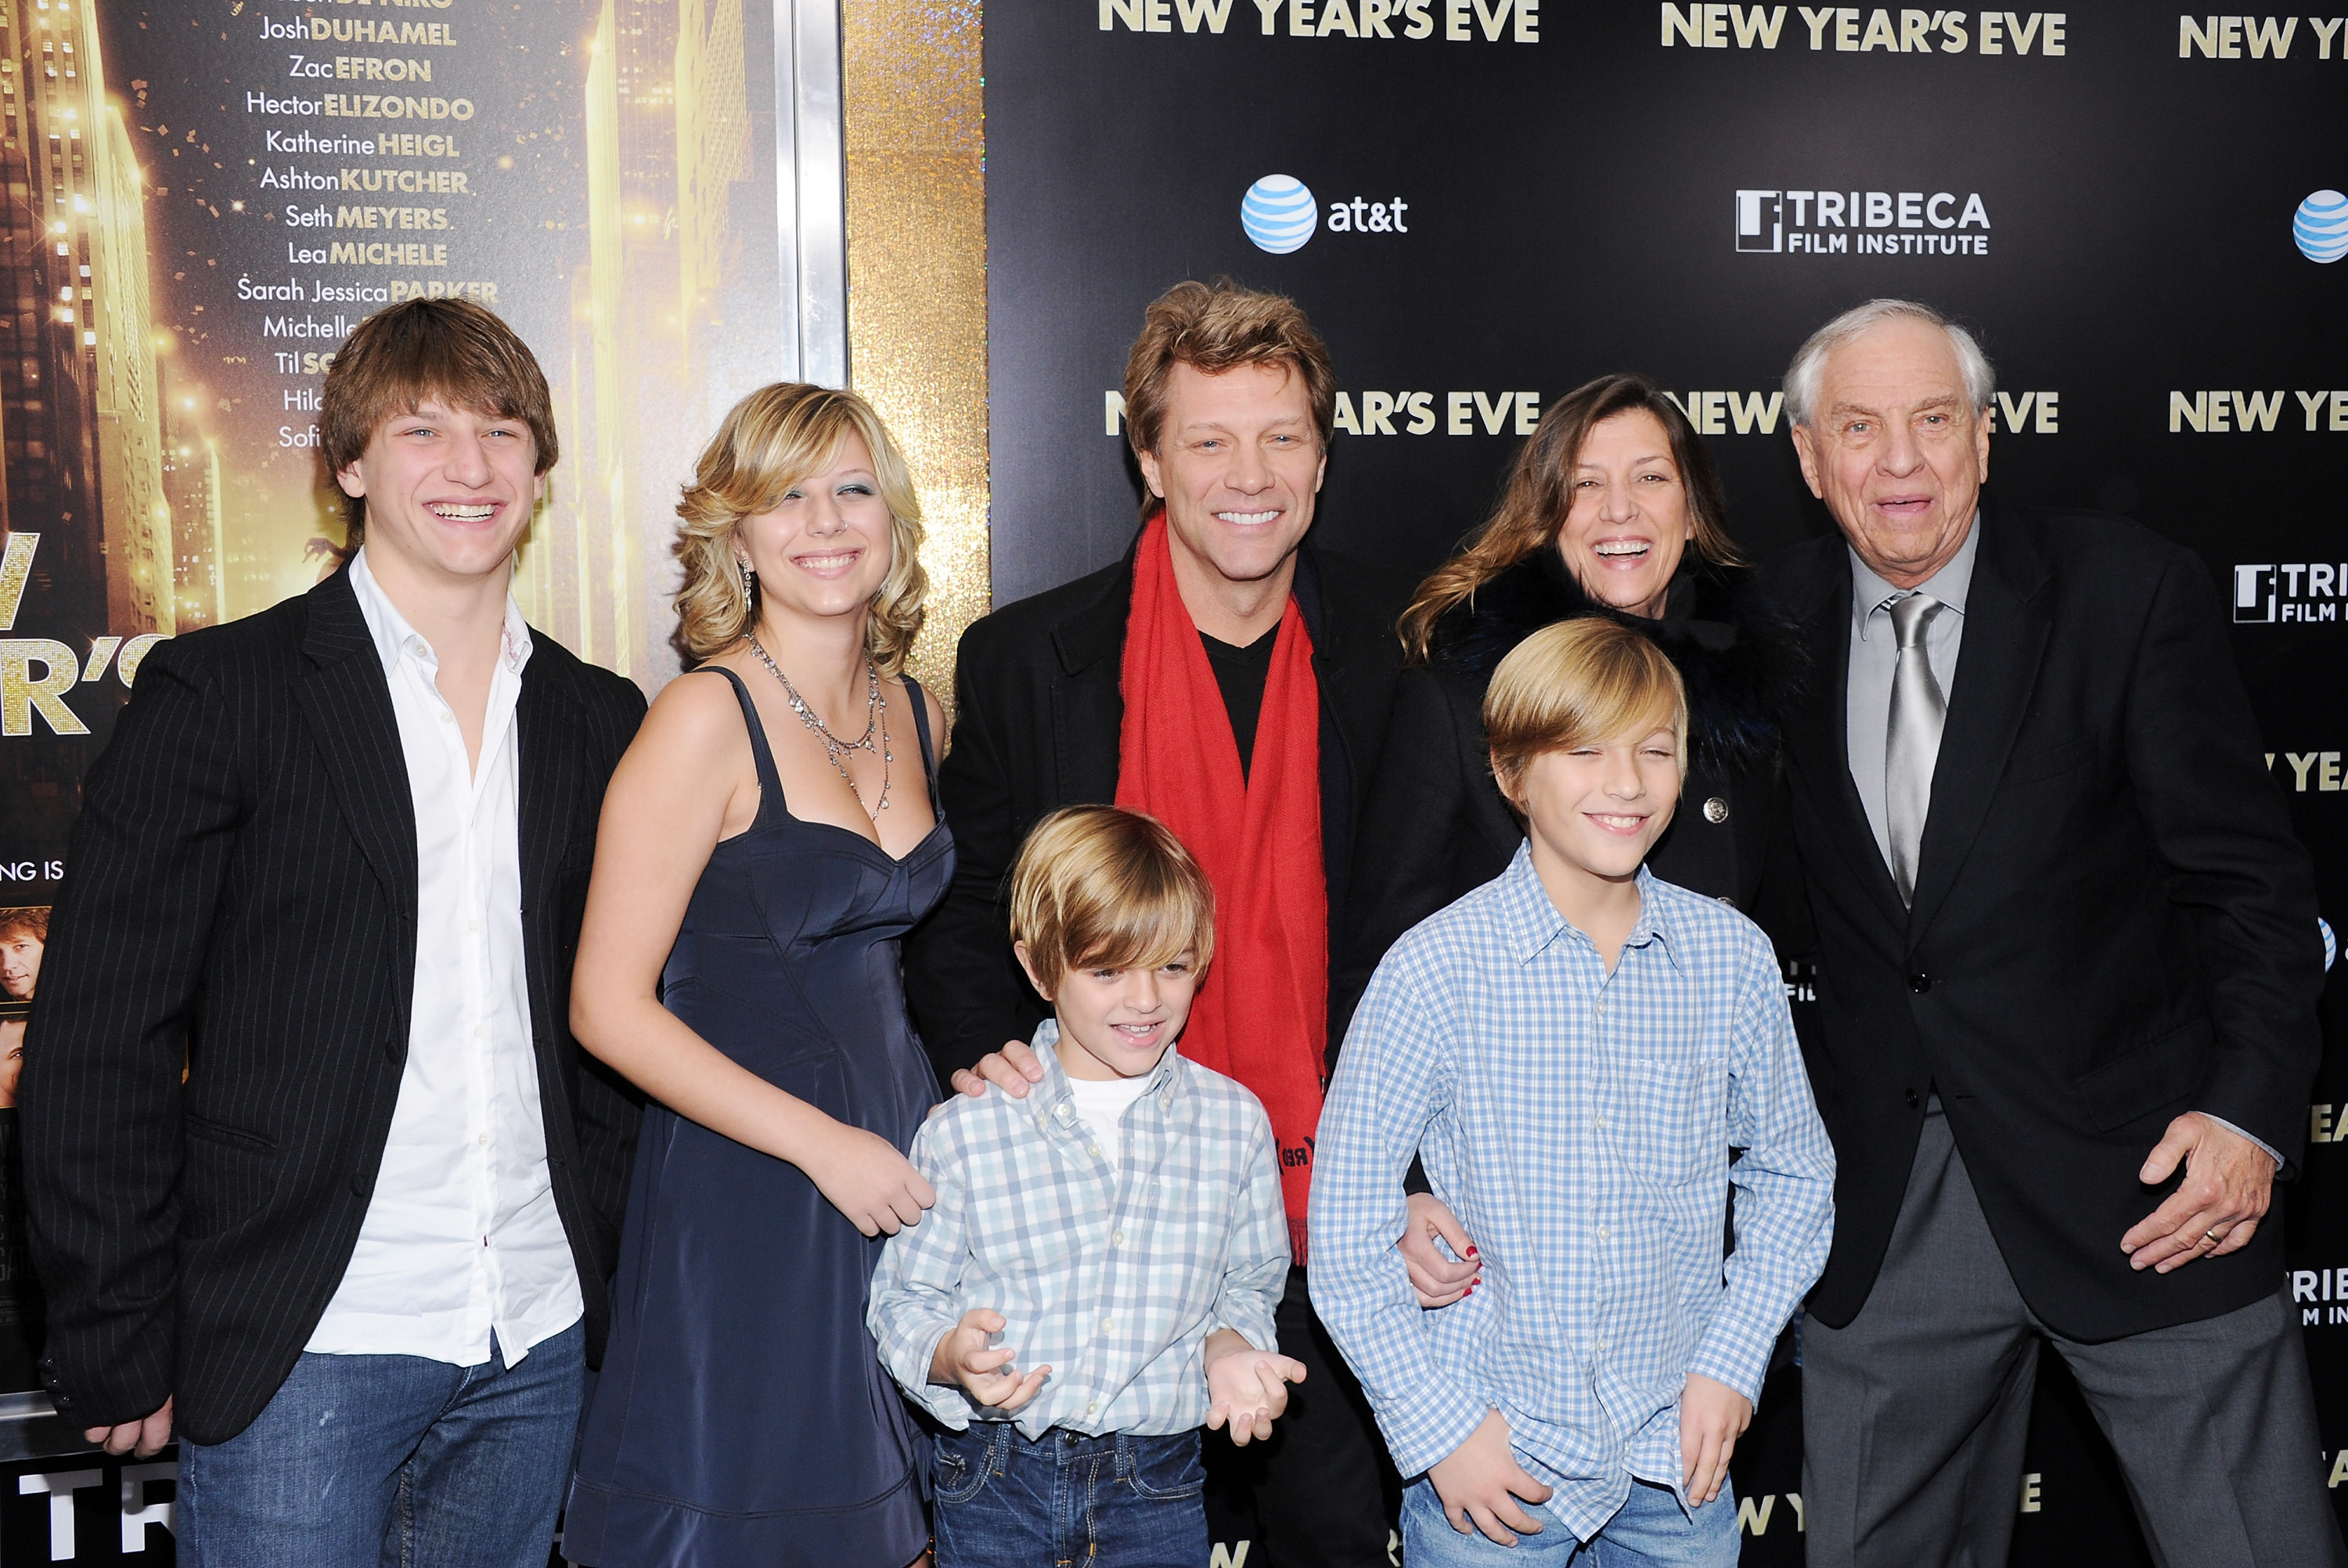 Jesse, Stephanie Rose, Romeo (front left), Jon Bon Jovi, Jacob Hurley (front right), Dorothea Bongiovi, and Garry Marshall attend the "New Year's Eve" premiere in New York City on December 7, 2011. | Source: Getty Images